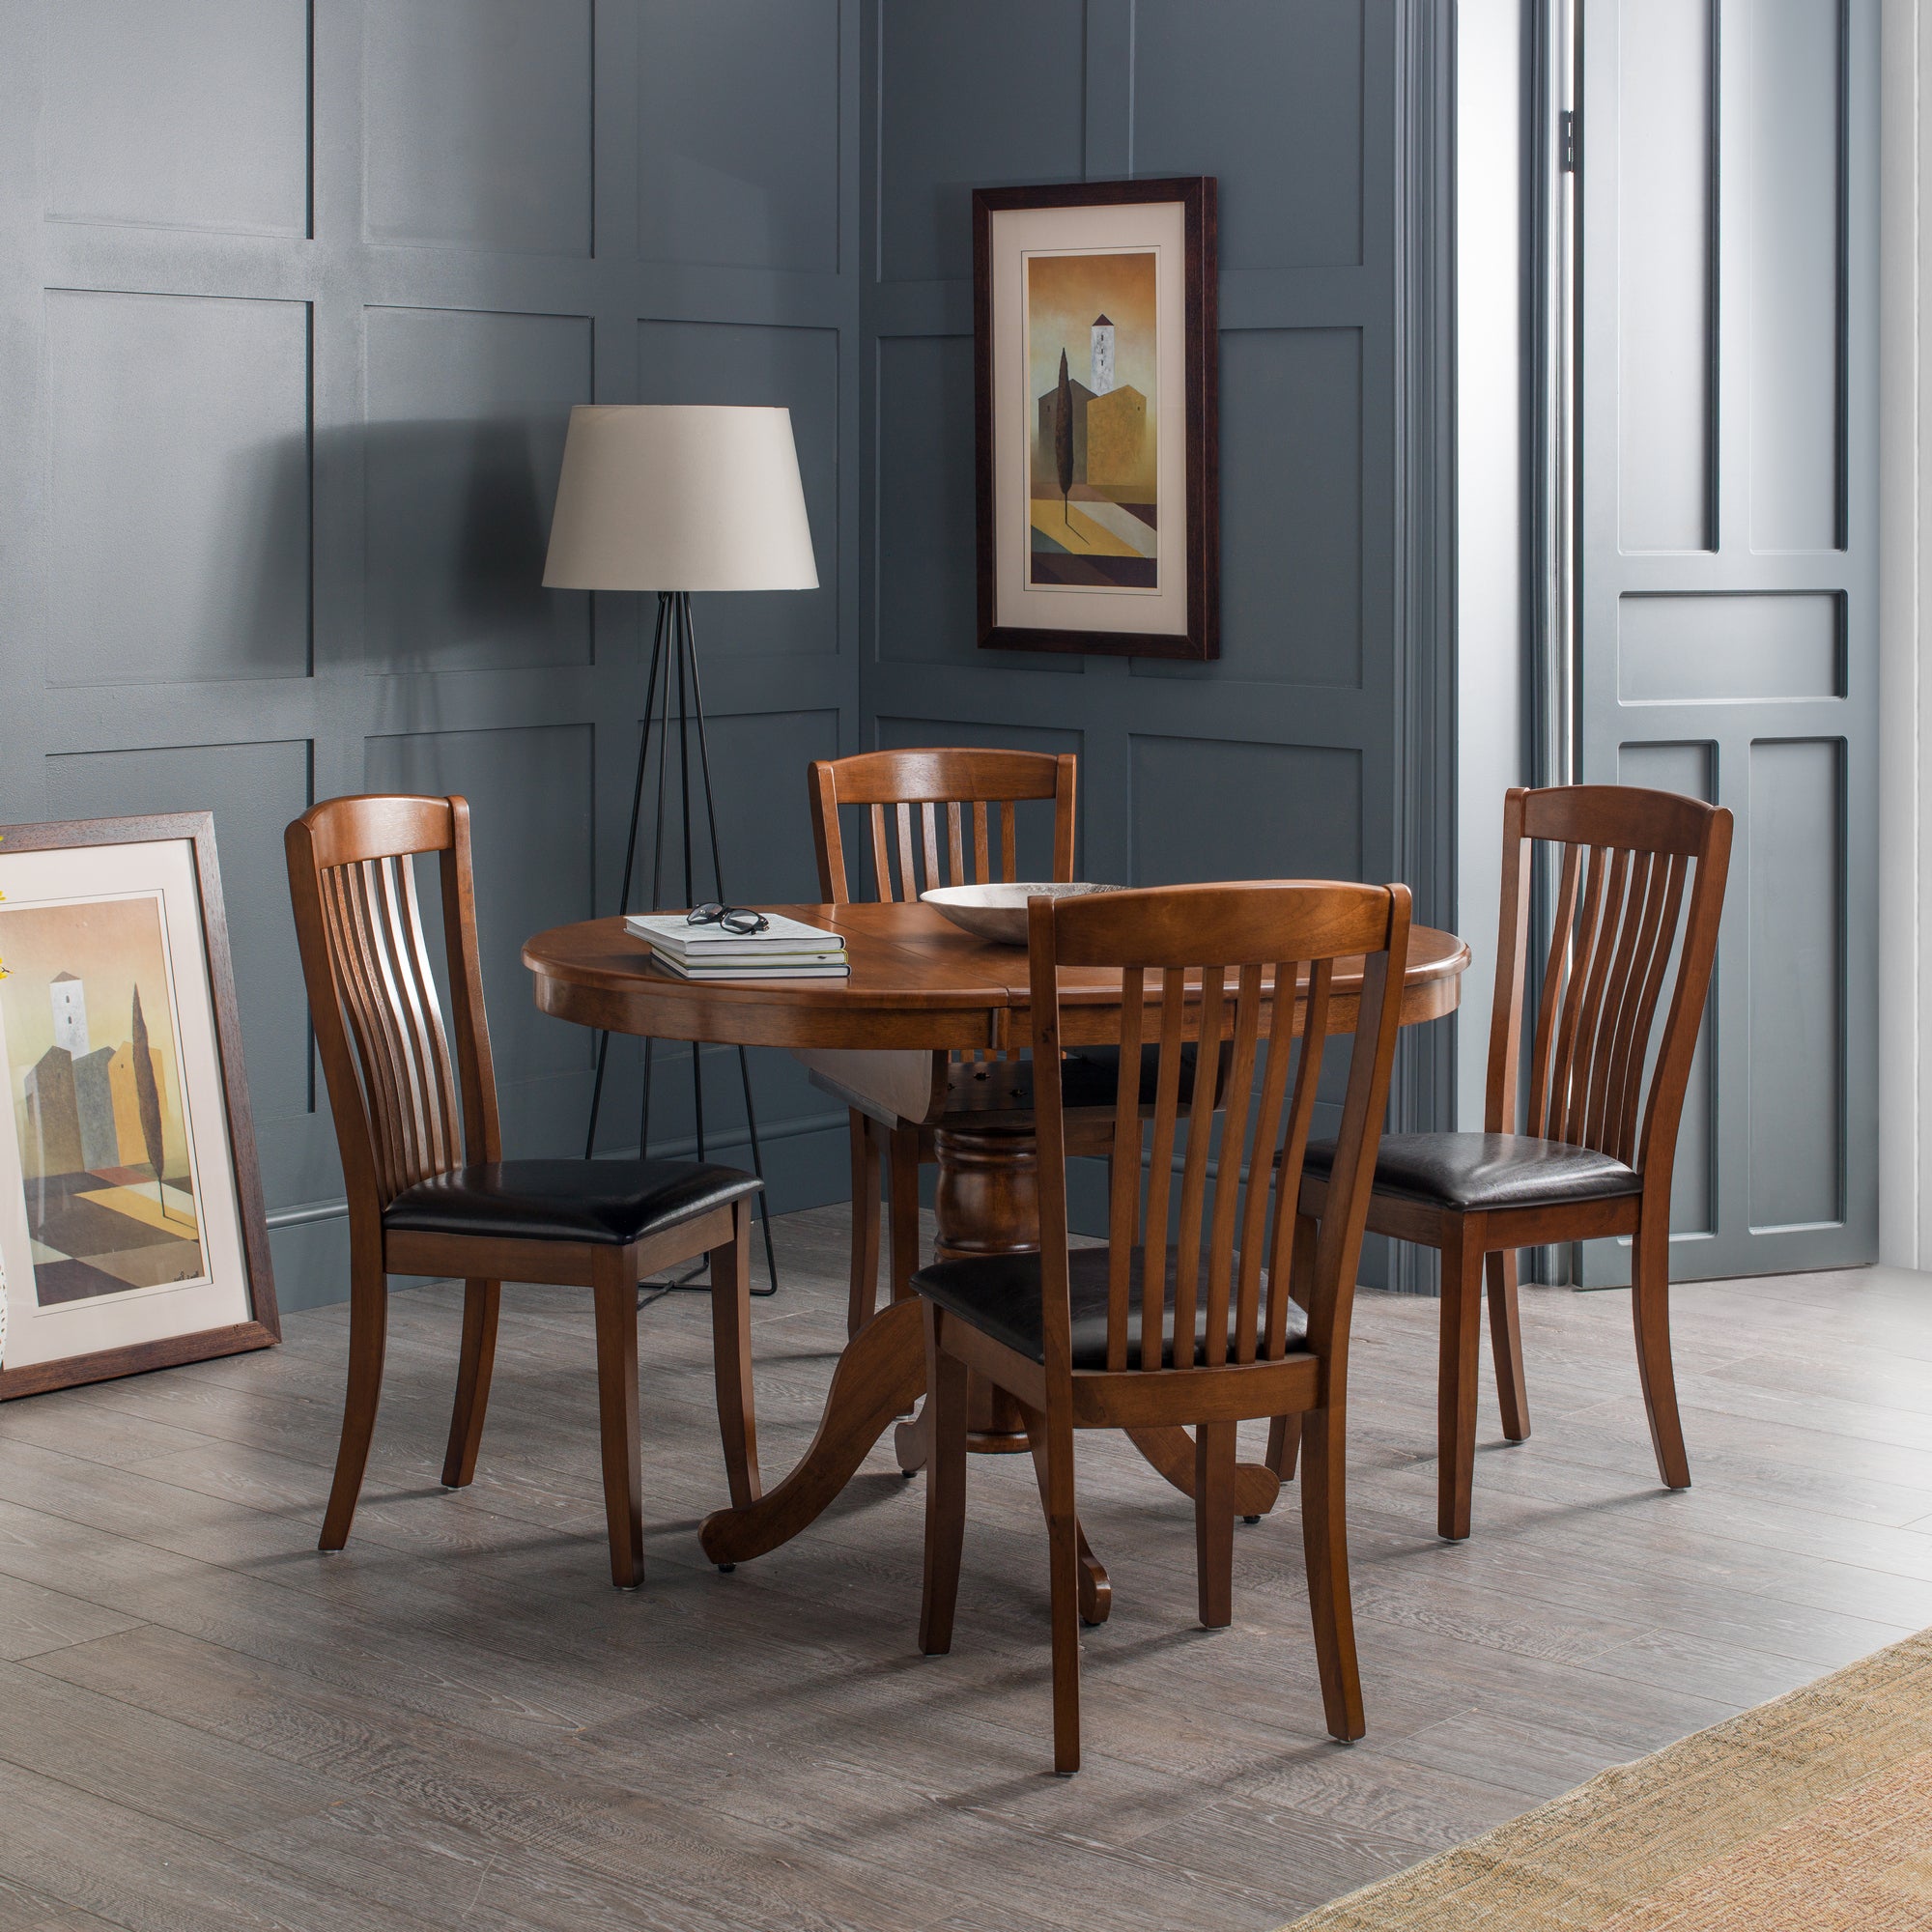 Canterbury Round to Oval Dining Table with 4 Chairs, Brown Mahogany (Brown)